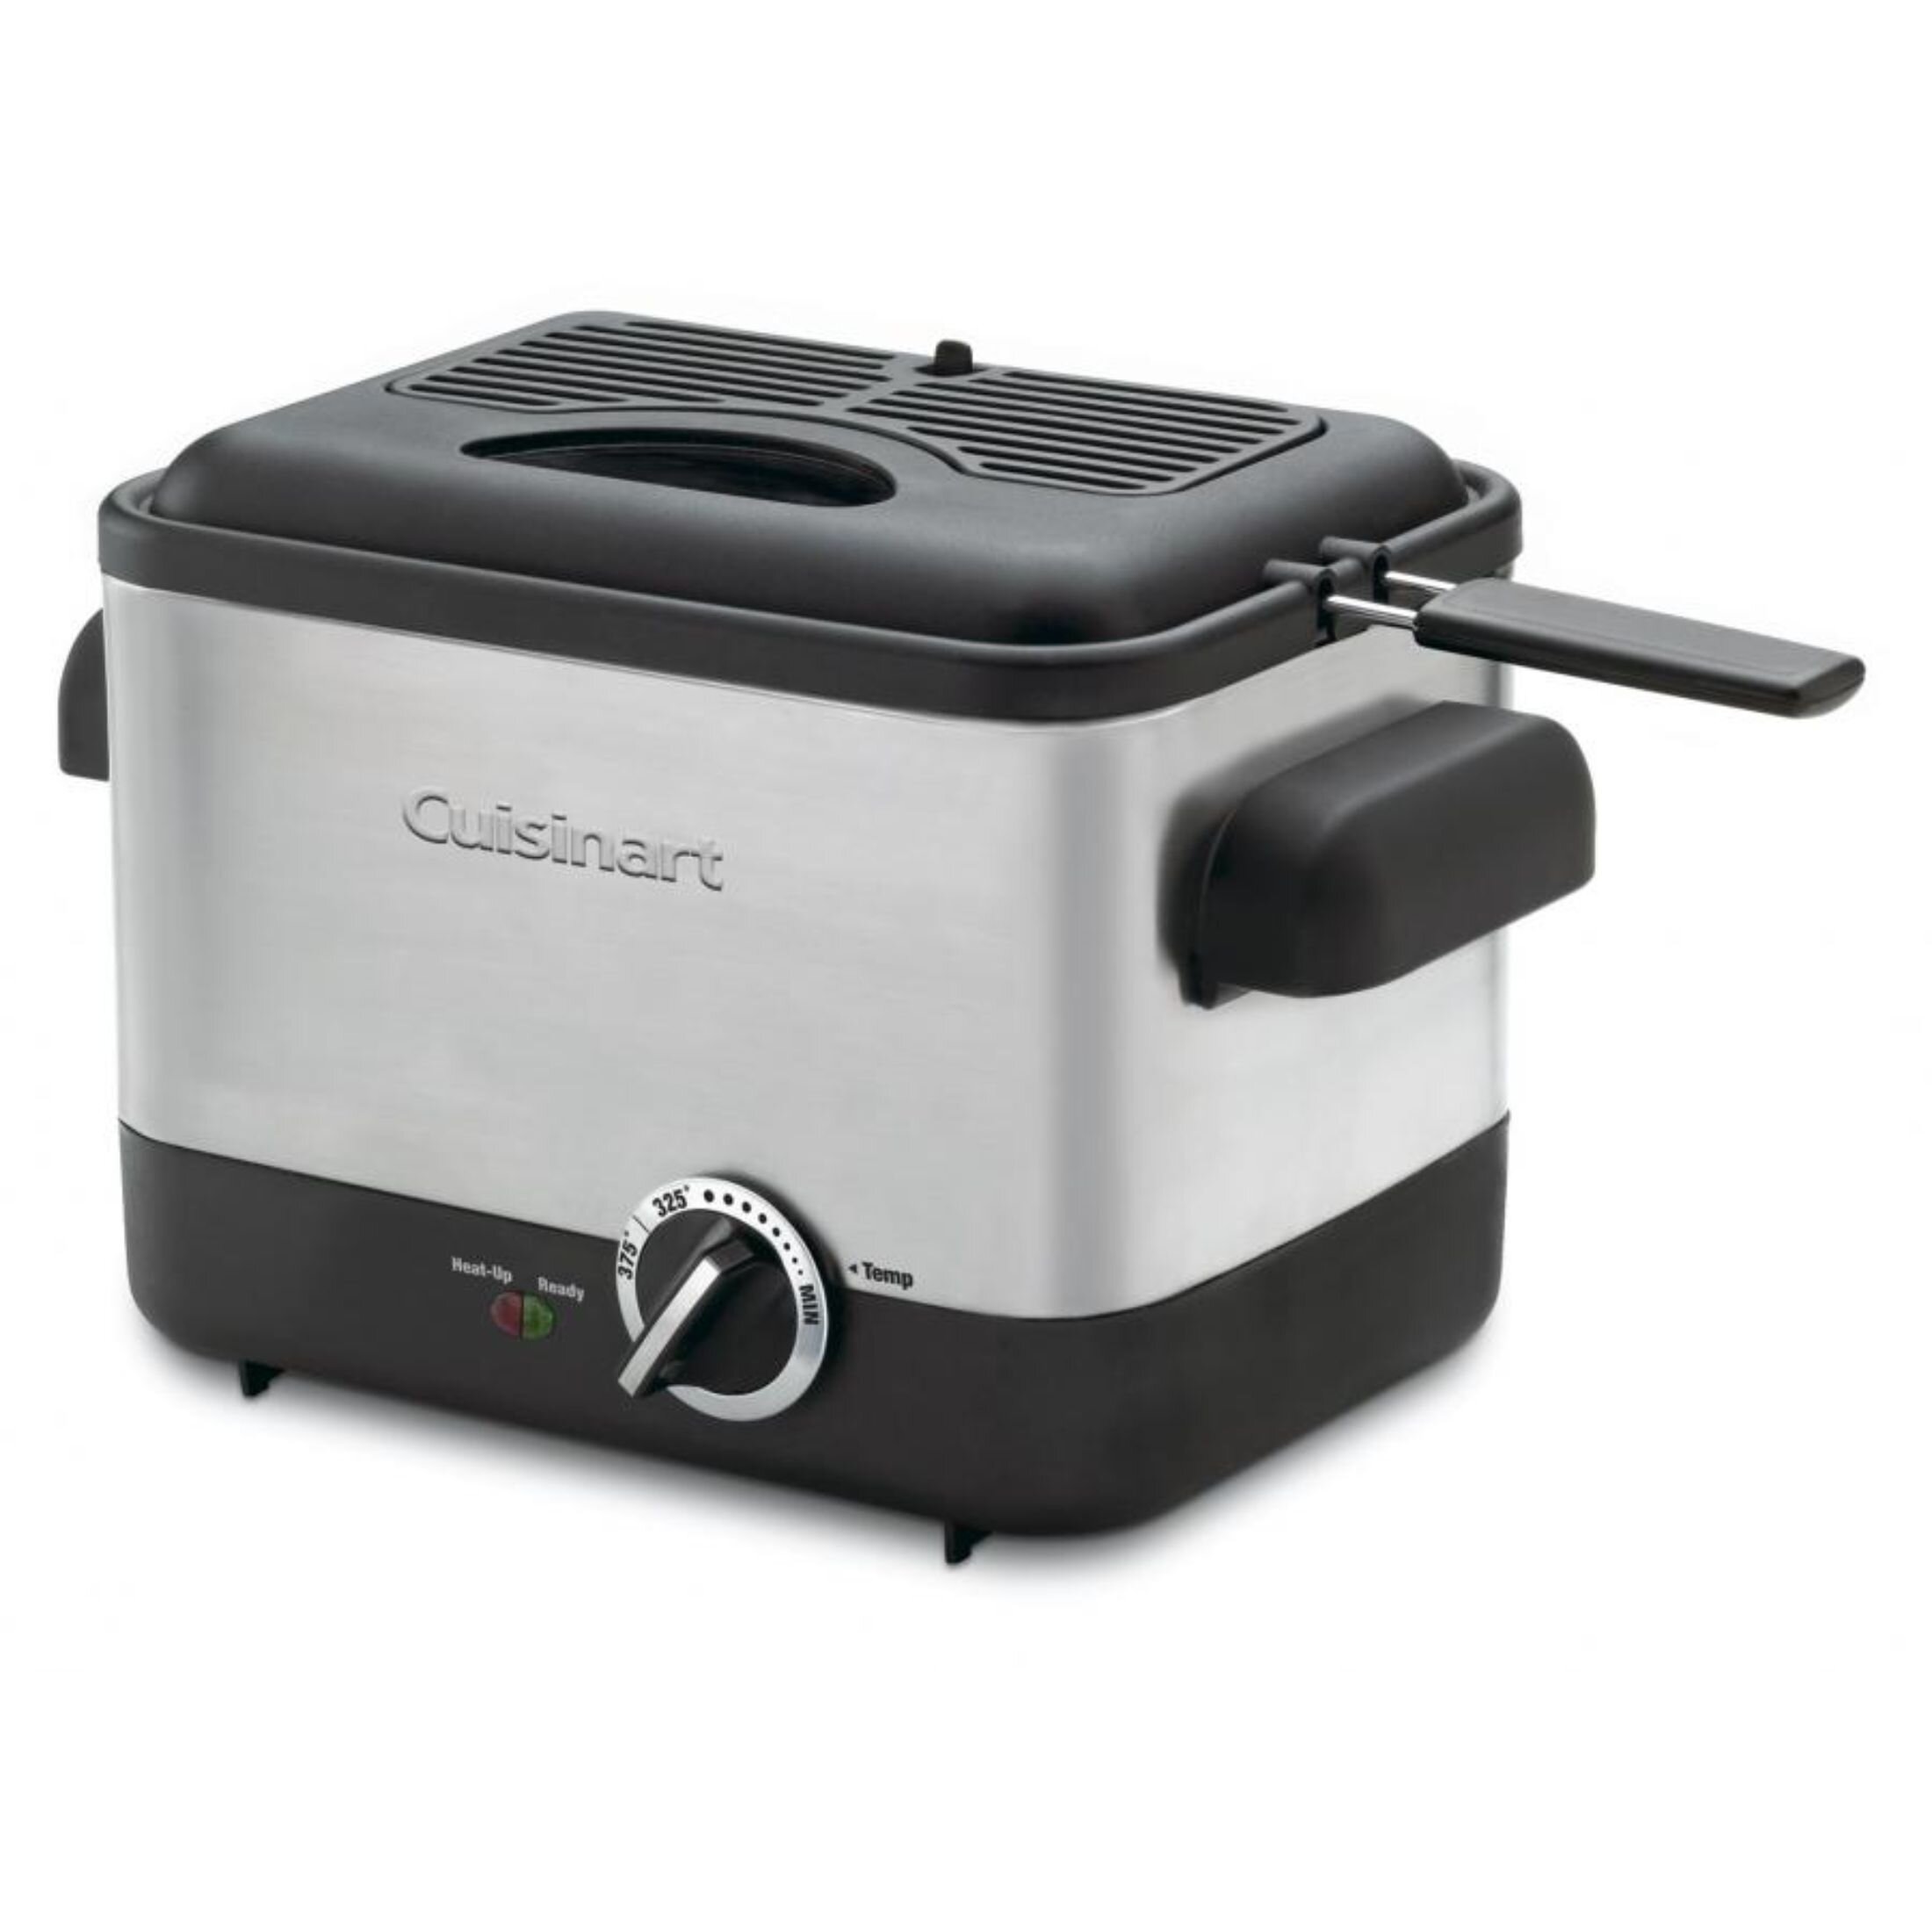  Oster Professional Style Stainless Steel Deep Fryer: Home &  Kitchen